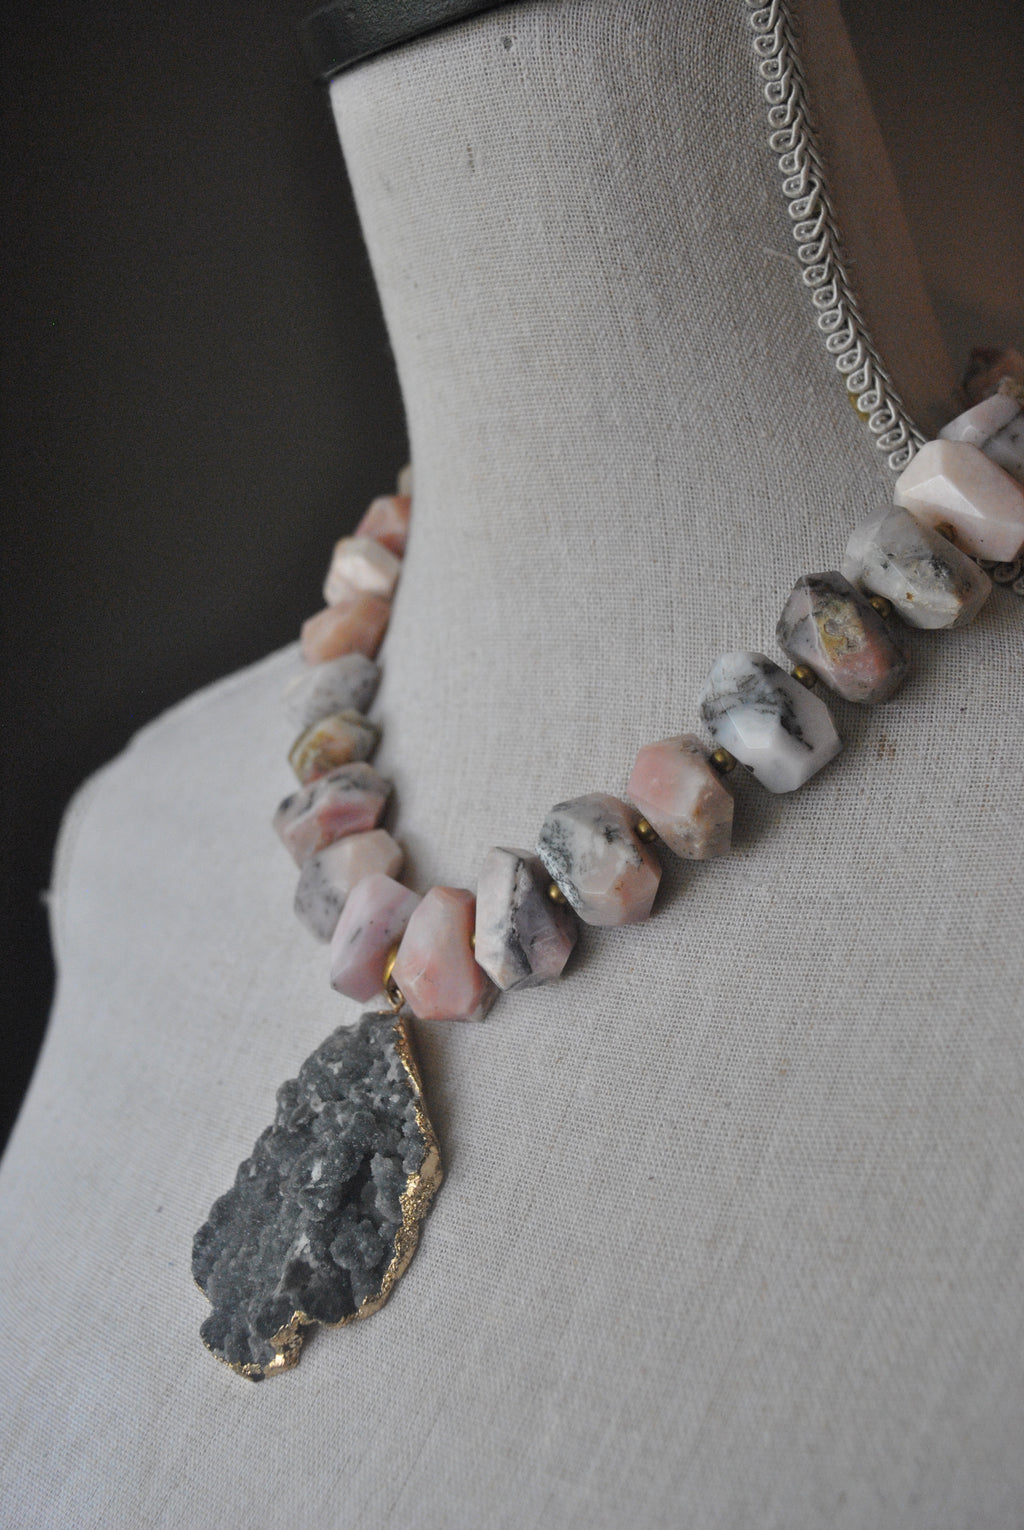 PINK PERUVIAN FREEFORM AND SILVER DRUZY PENDANT STATEMENT NECKLACE